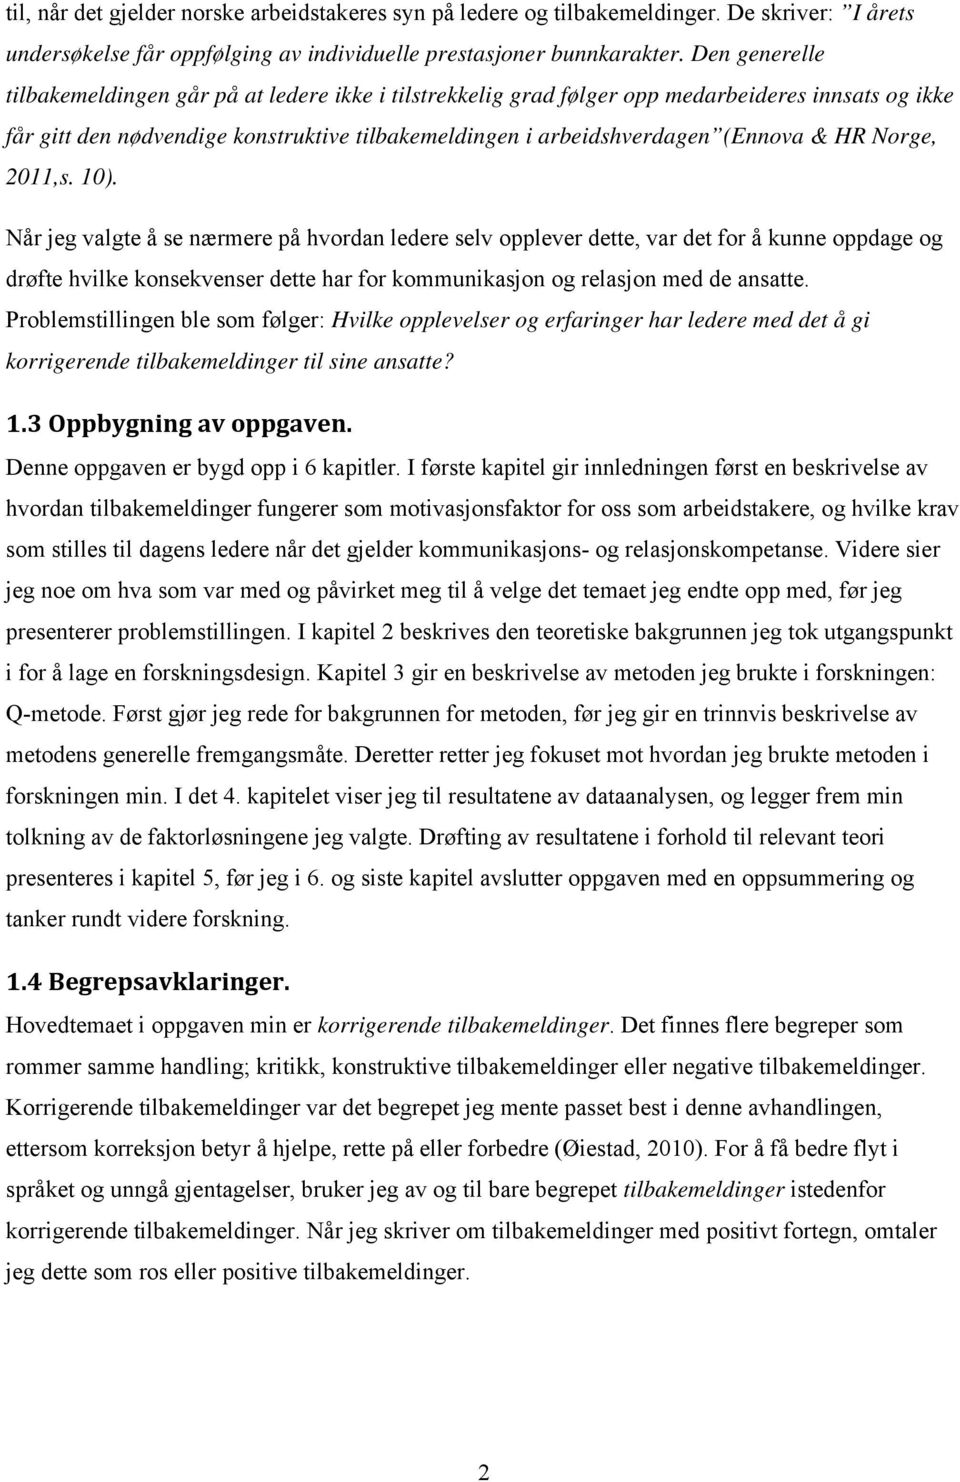 HR Norge, 2011,s. 10).